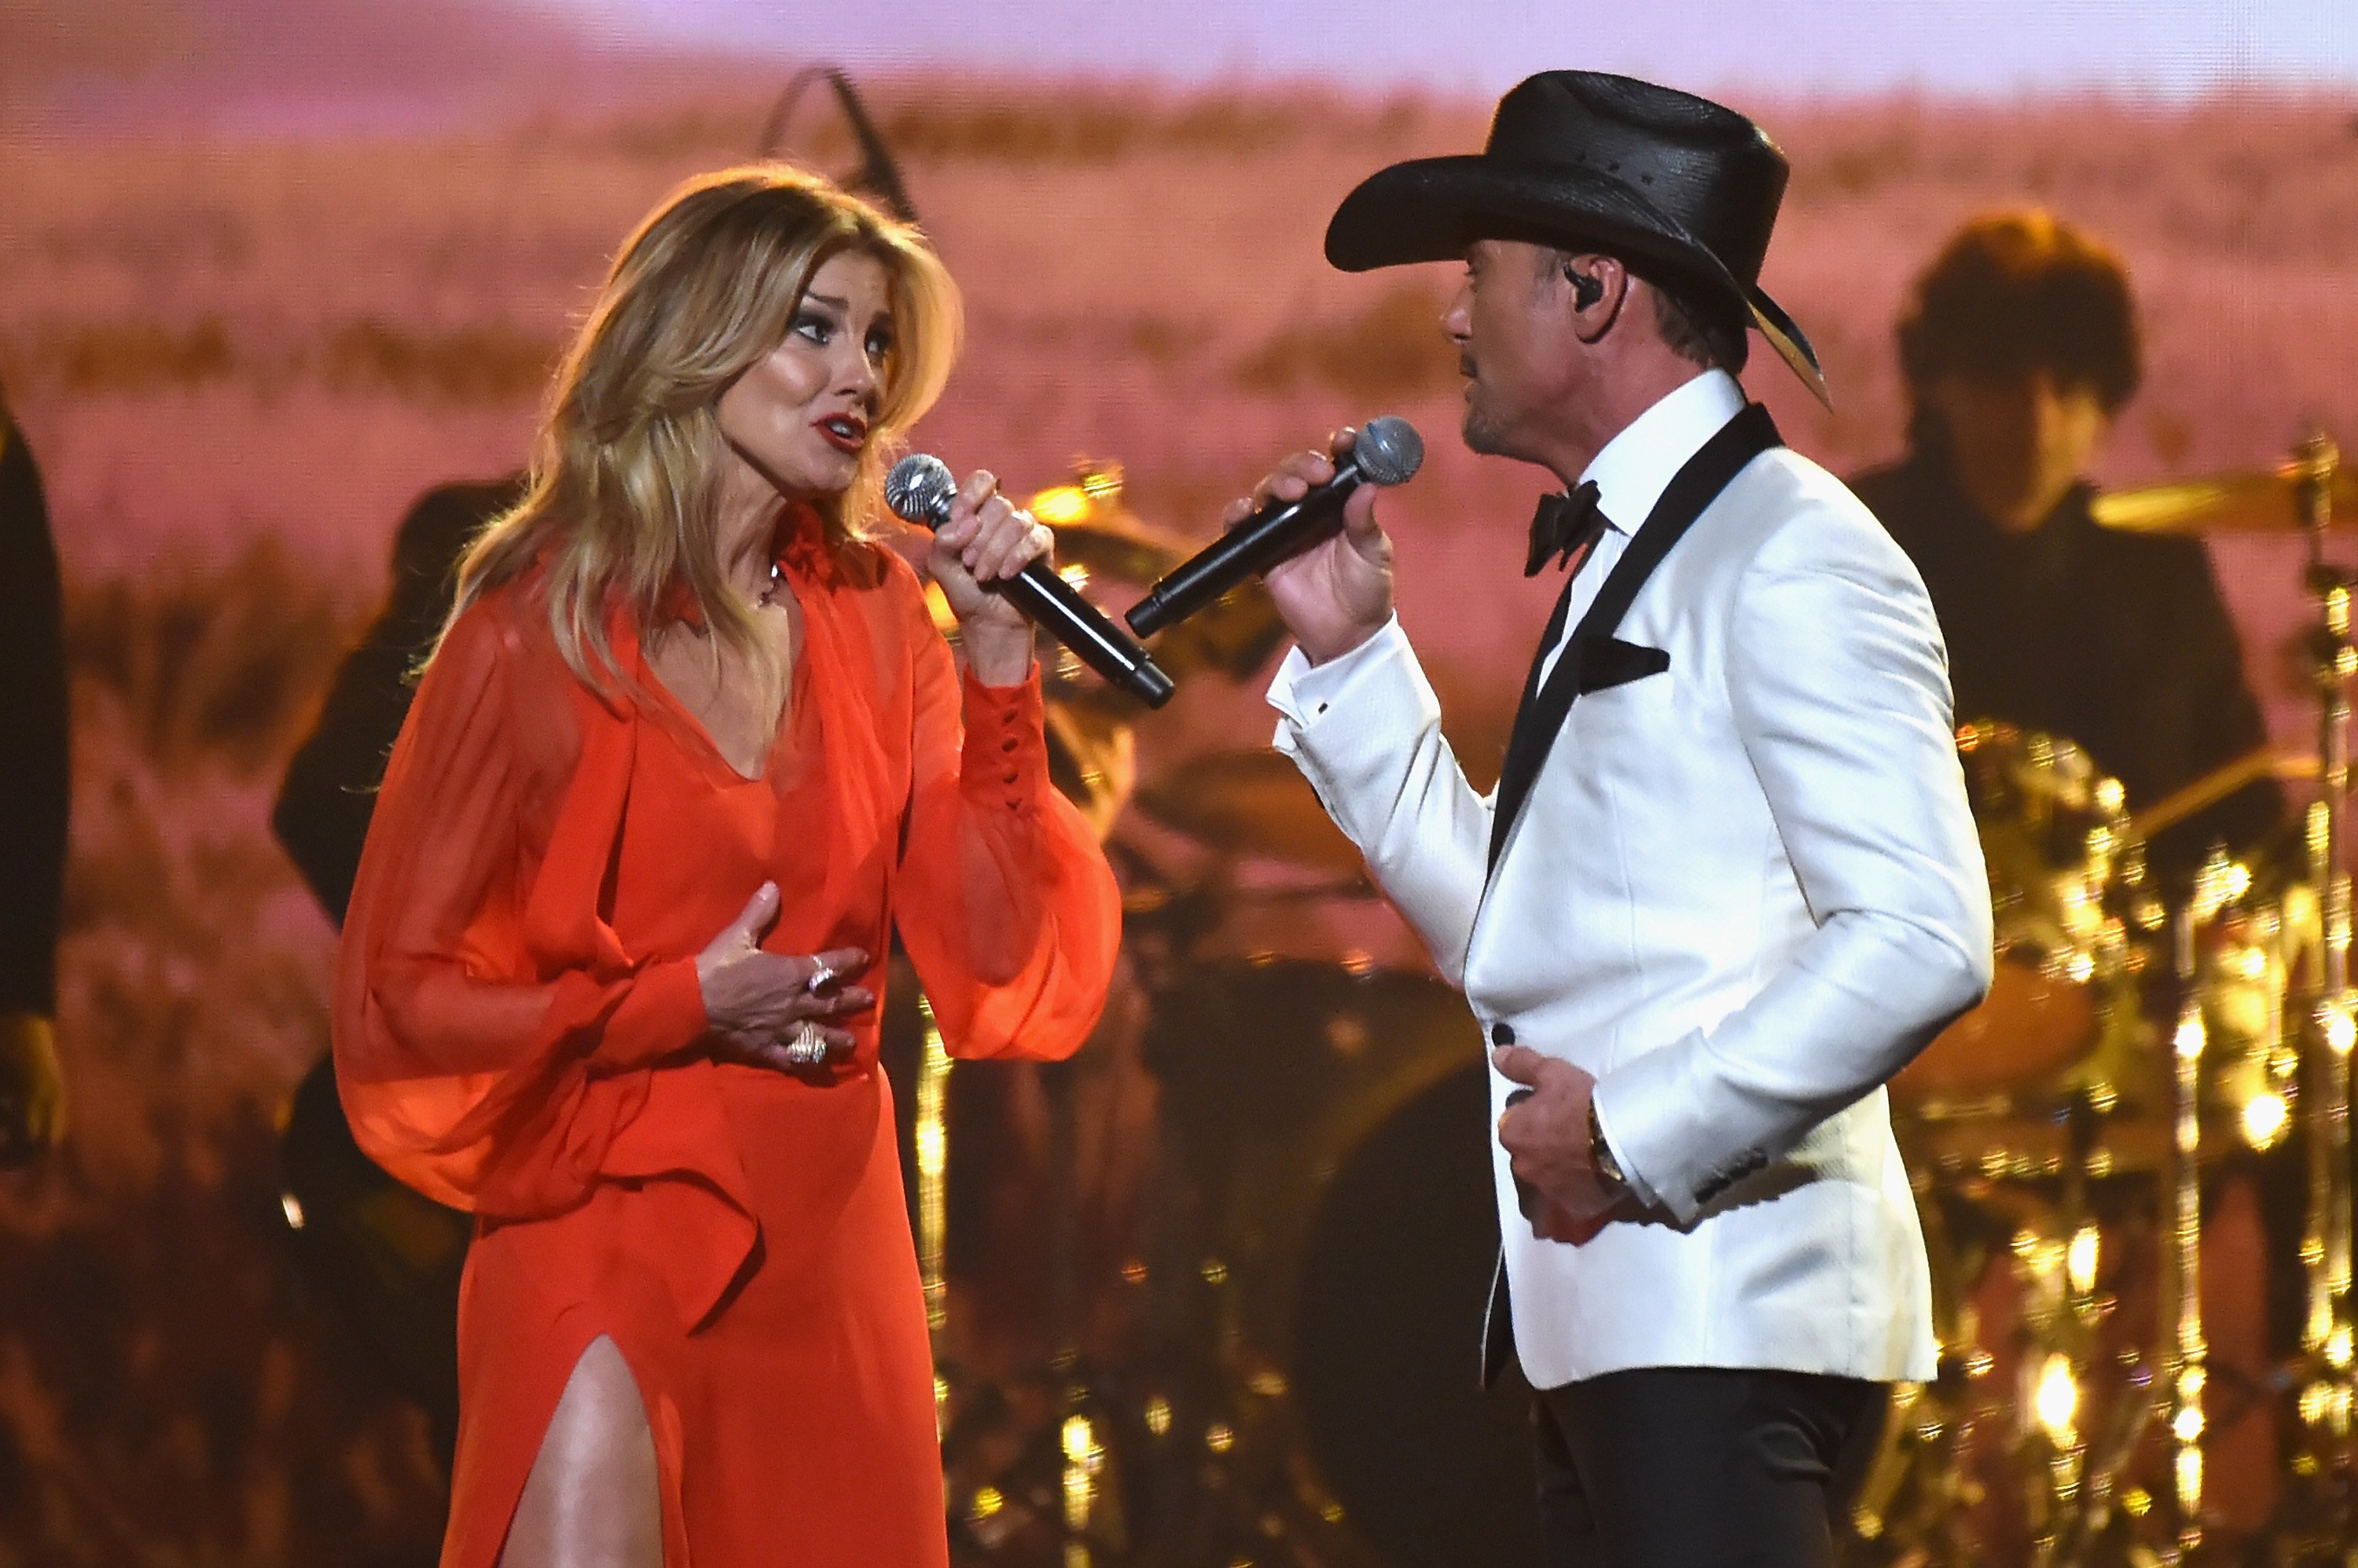 Faith Hill and Tim McGraw perform onstage during the 51st annual CMA Awards at the Bridgestone Arena on November 8, 2017 in Nashville, Tennessee. | Photo: Getty Images